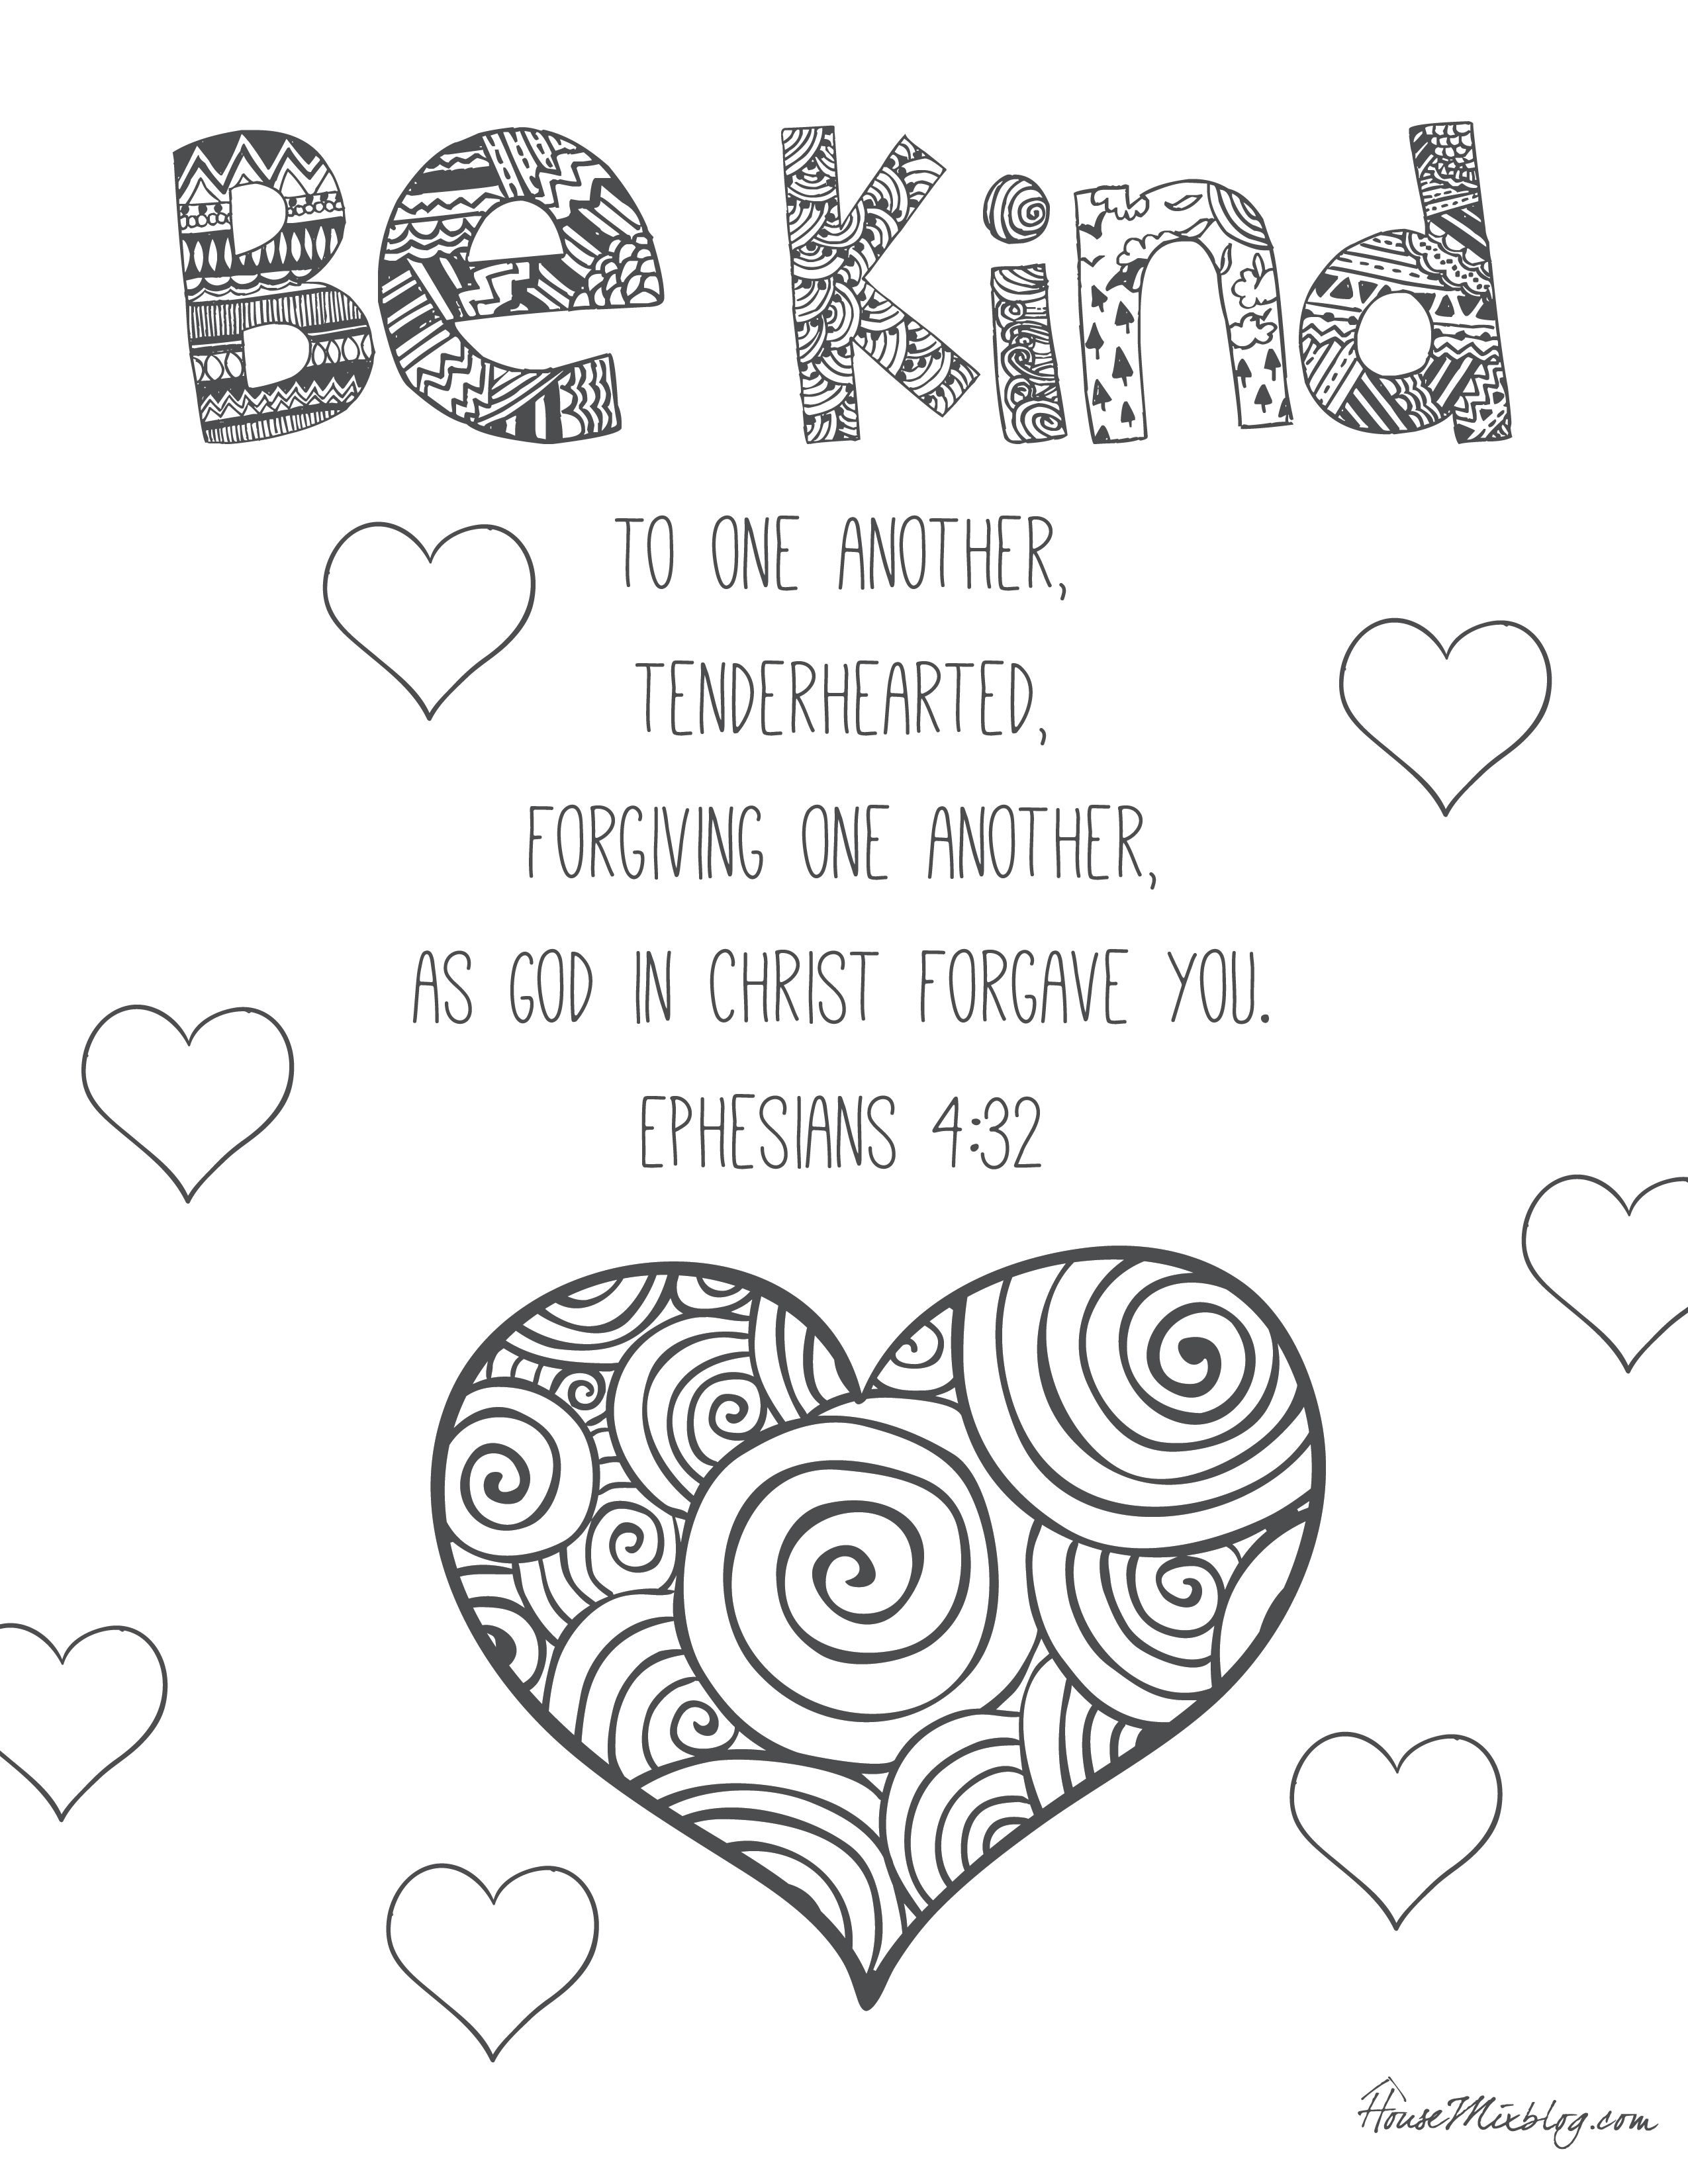 Kindness Coloring Pages Printable at Free printable